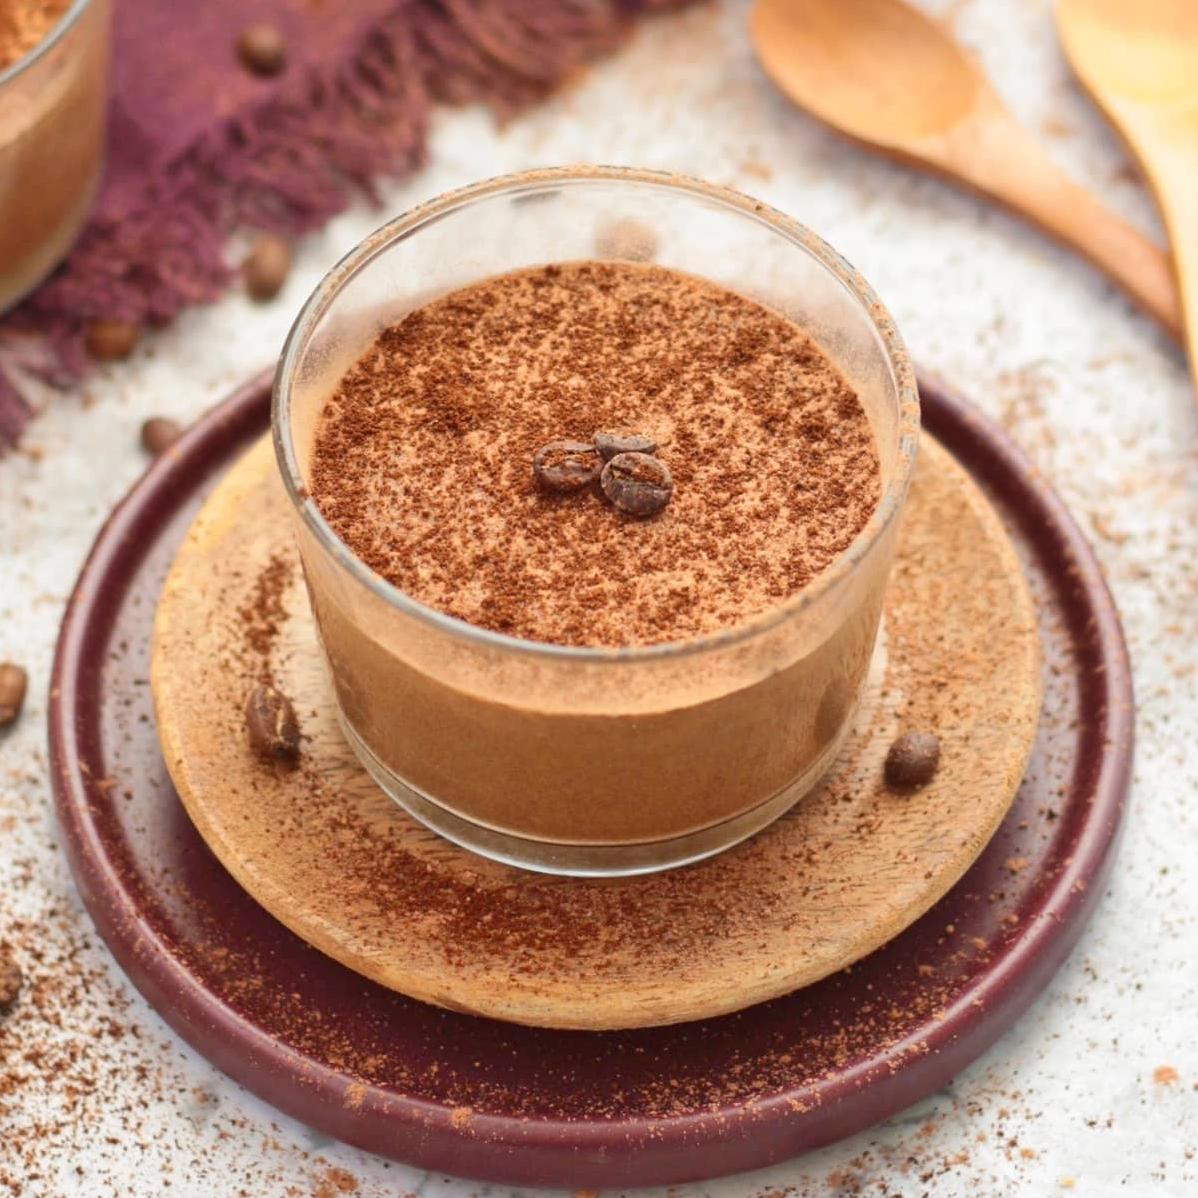  A delicious treat for coffee lovers who want to shake up their routine!